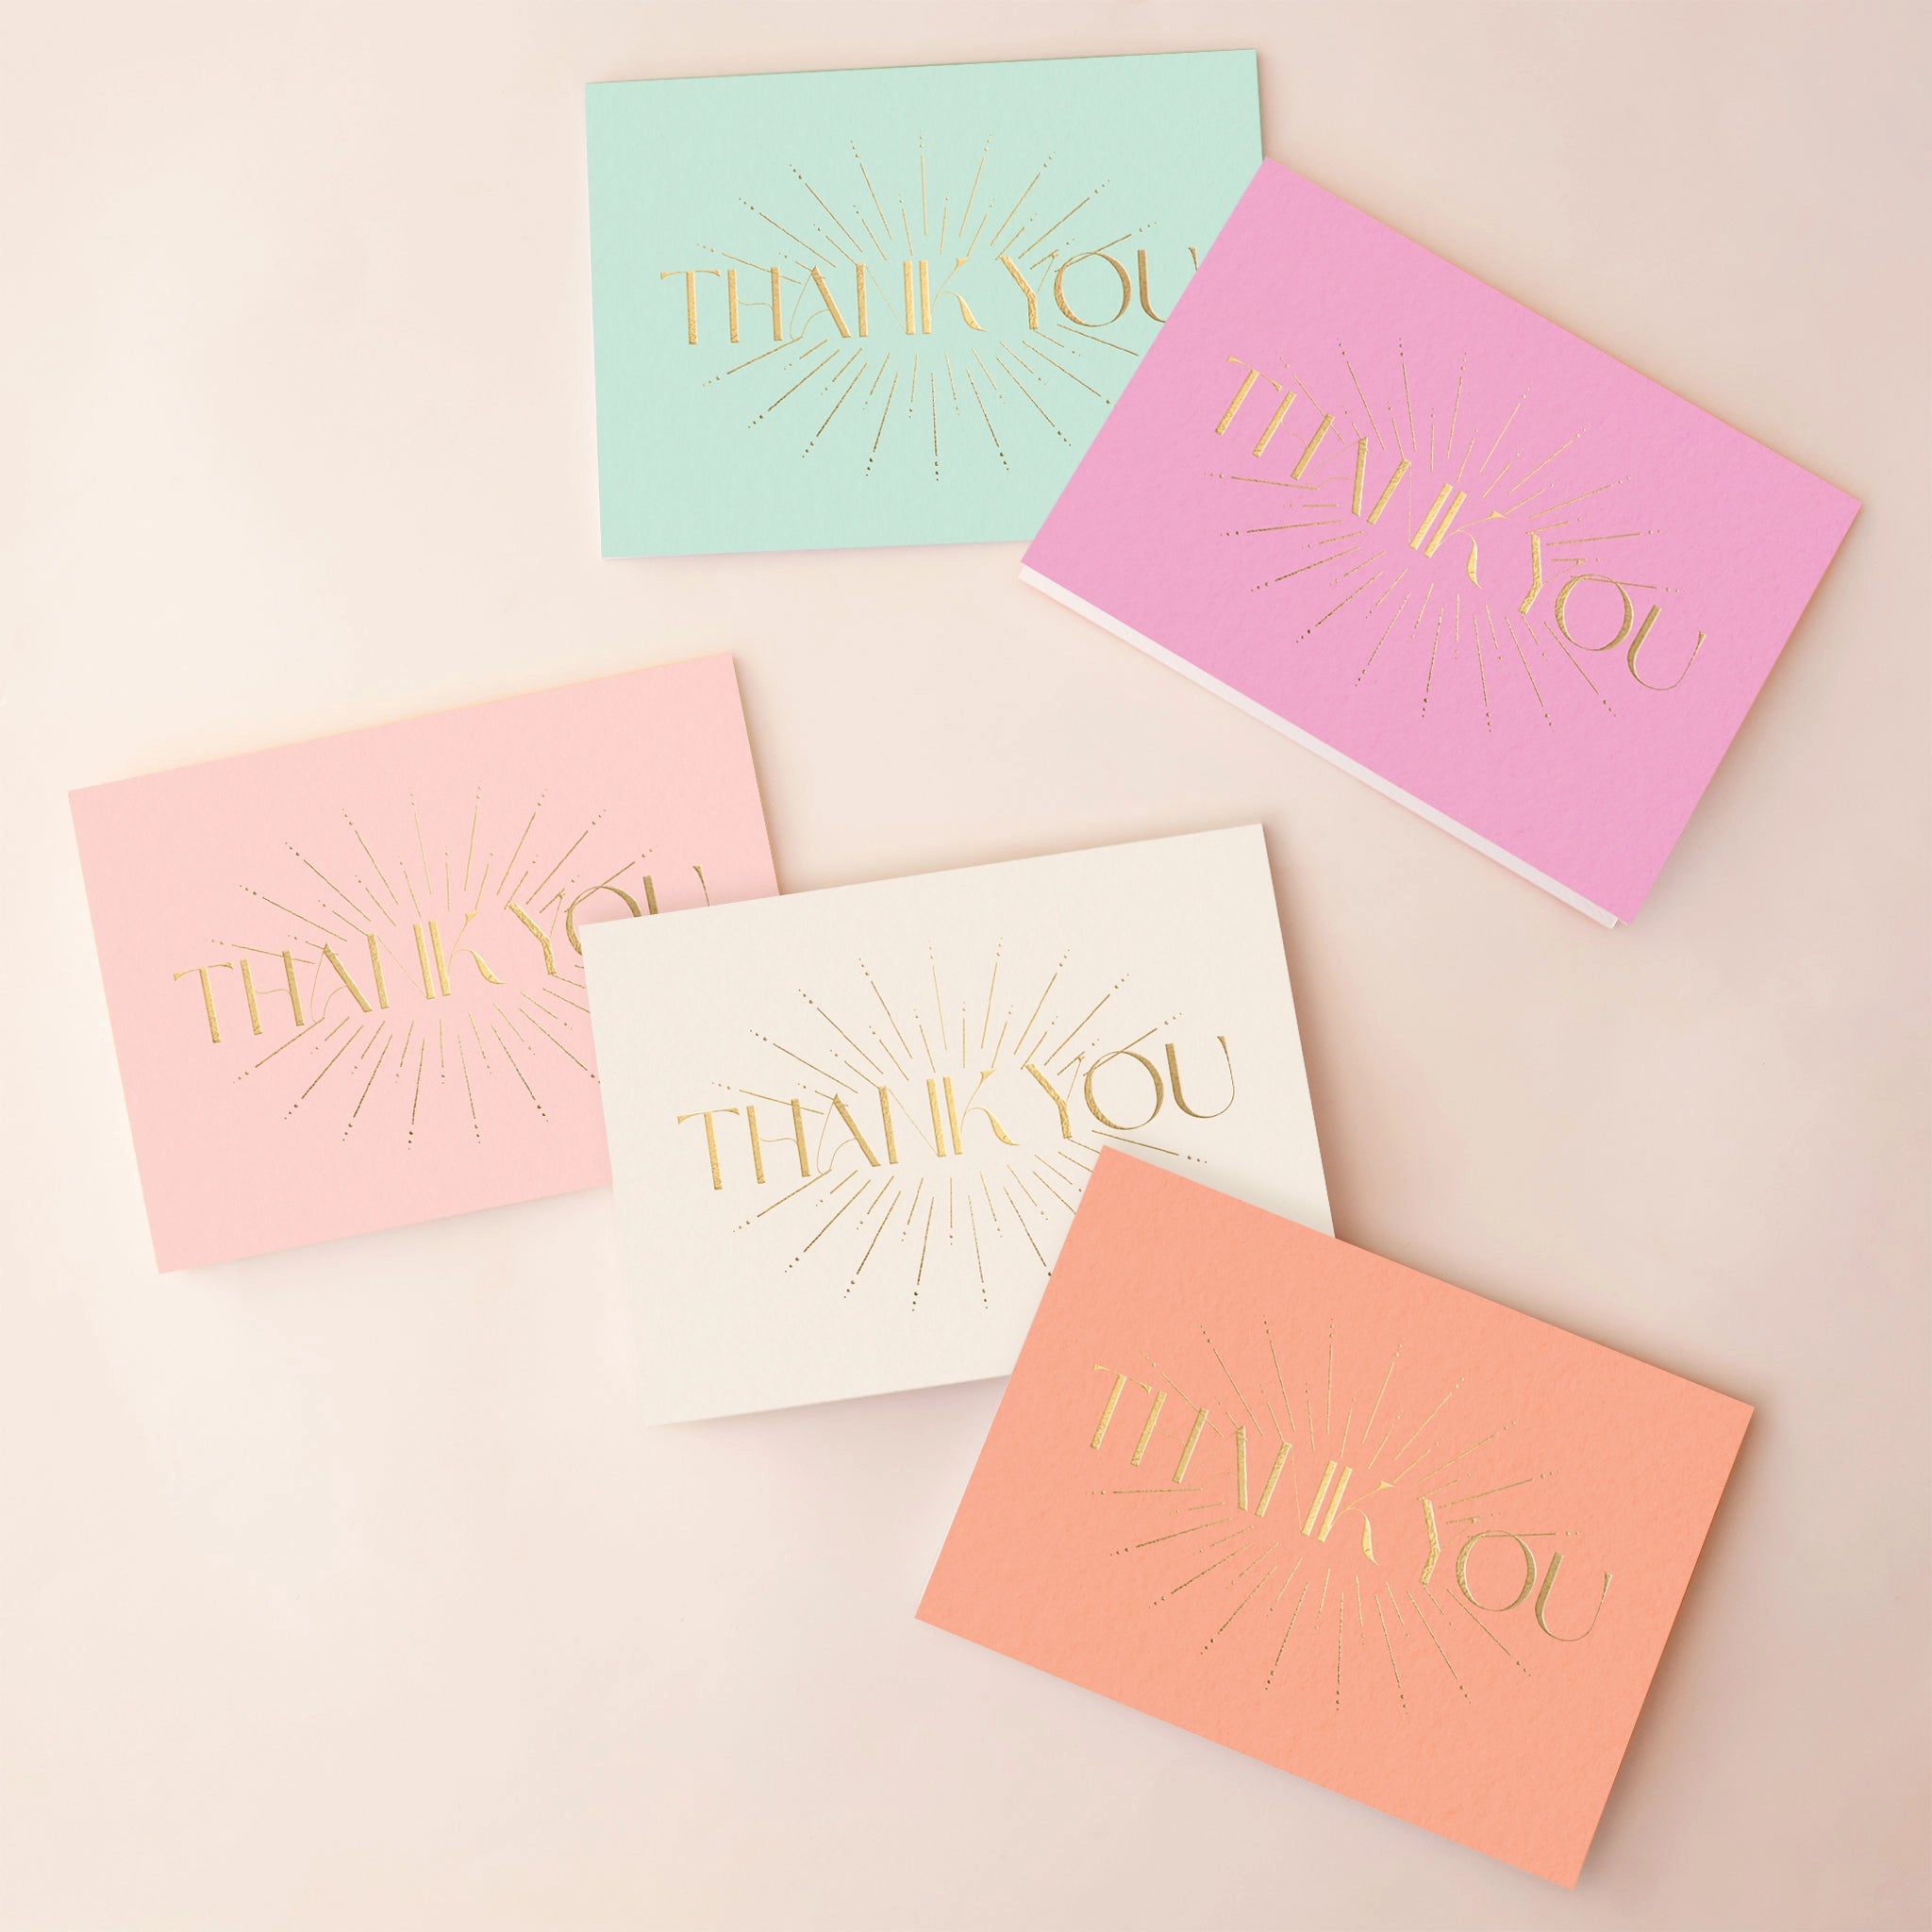 On an ivory background is five different colored thank you cards with gold foiled letters in the center that read, "Thank You". The colors come in fuchsia, mint green, light pink, white and salmon. 